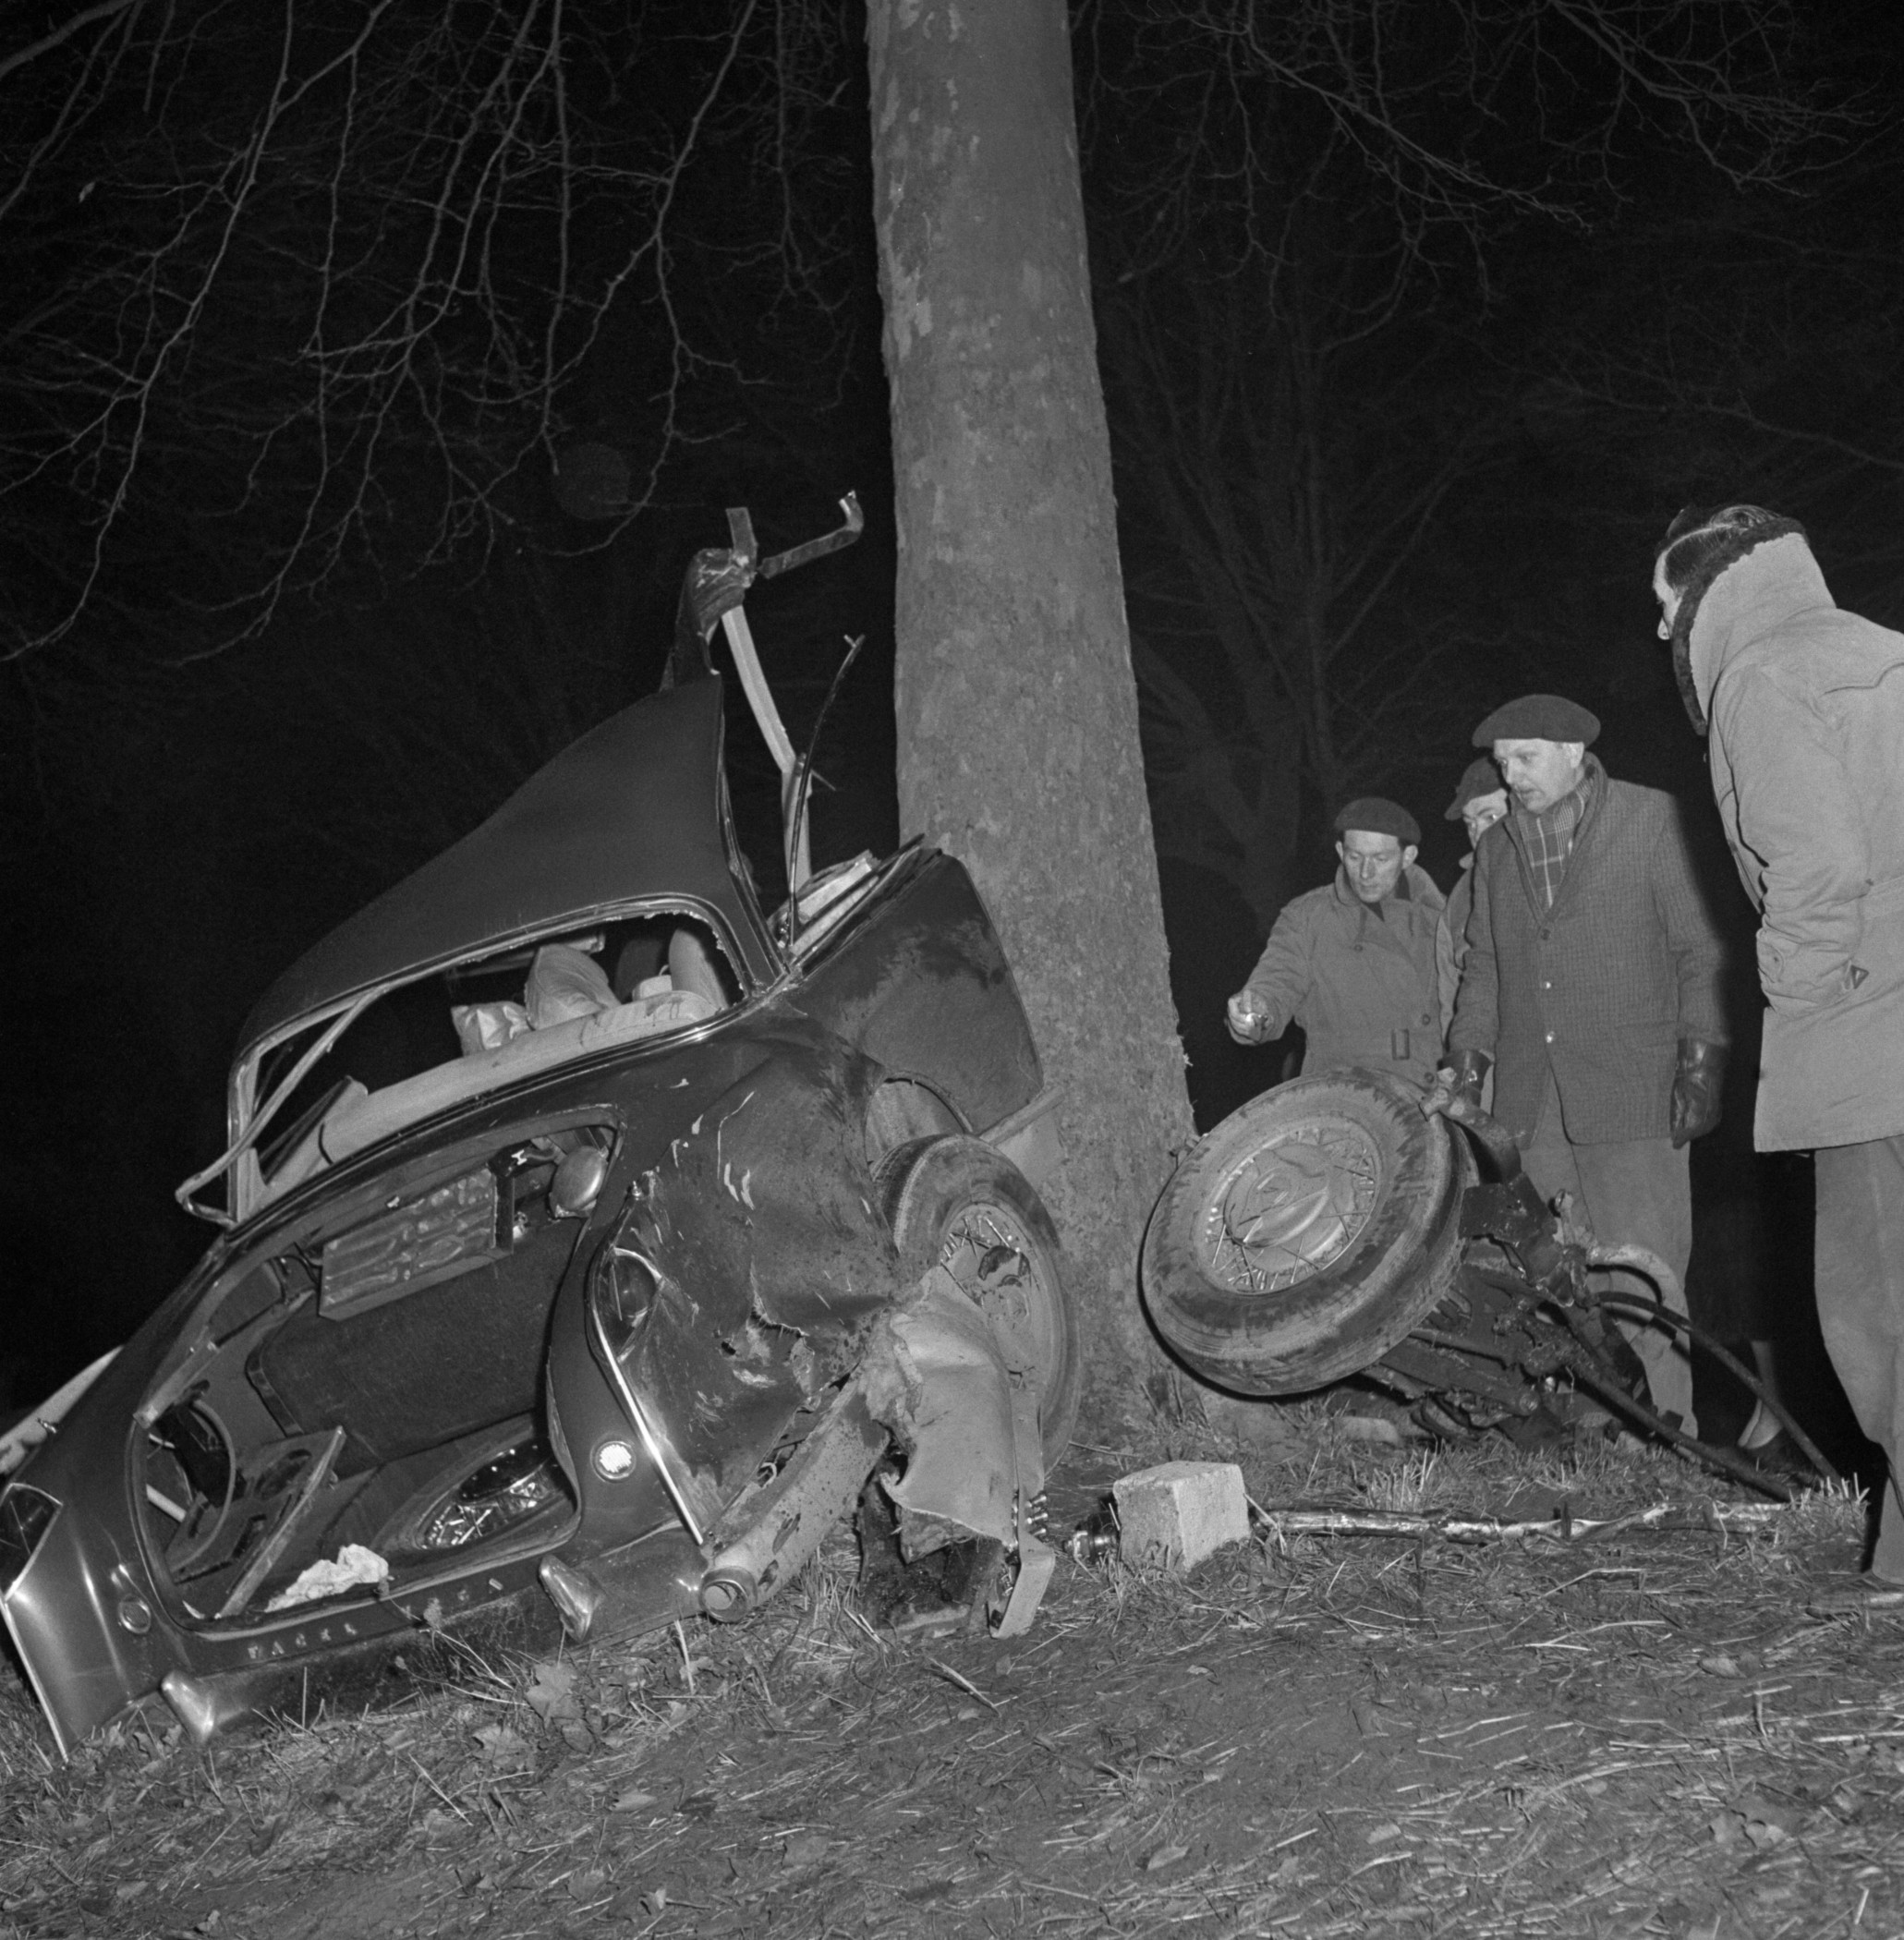 06 Jan 1960 --- Rescuers take a last look at the shattered wreck of the powerful, custom built Facel Vega auto in which famed French author Albert Camus met death near here, east of Paris. The car careened into a tree at about 80 miles an hour after tire blew out. Riding with the Nobel Literature prize winner (1957) were well-known publisher Michel Gallimard and Madame Gallimard. --- Image by © Bettmann/Corbis